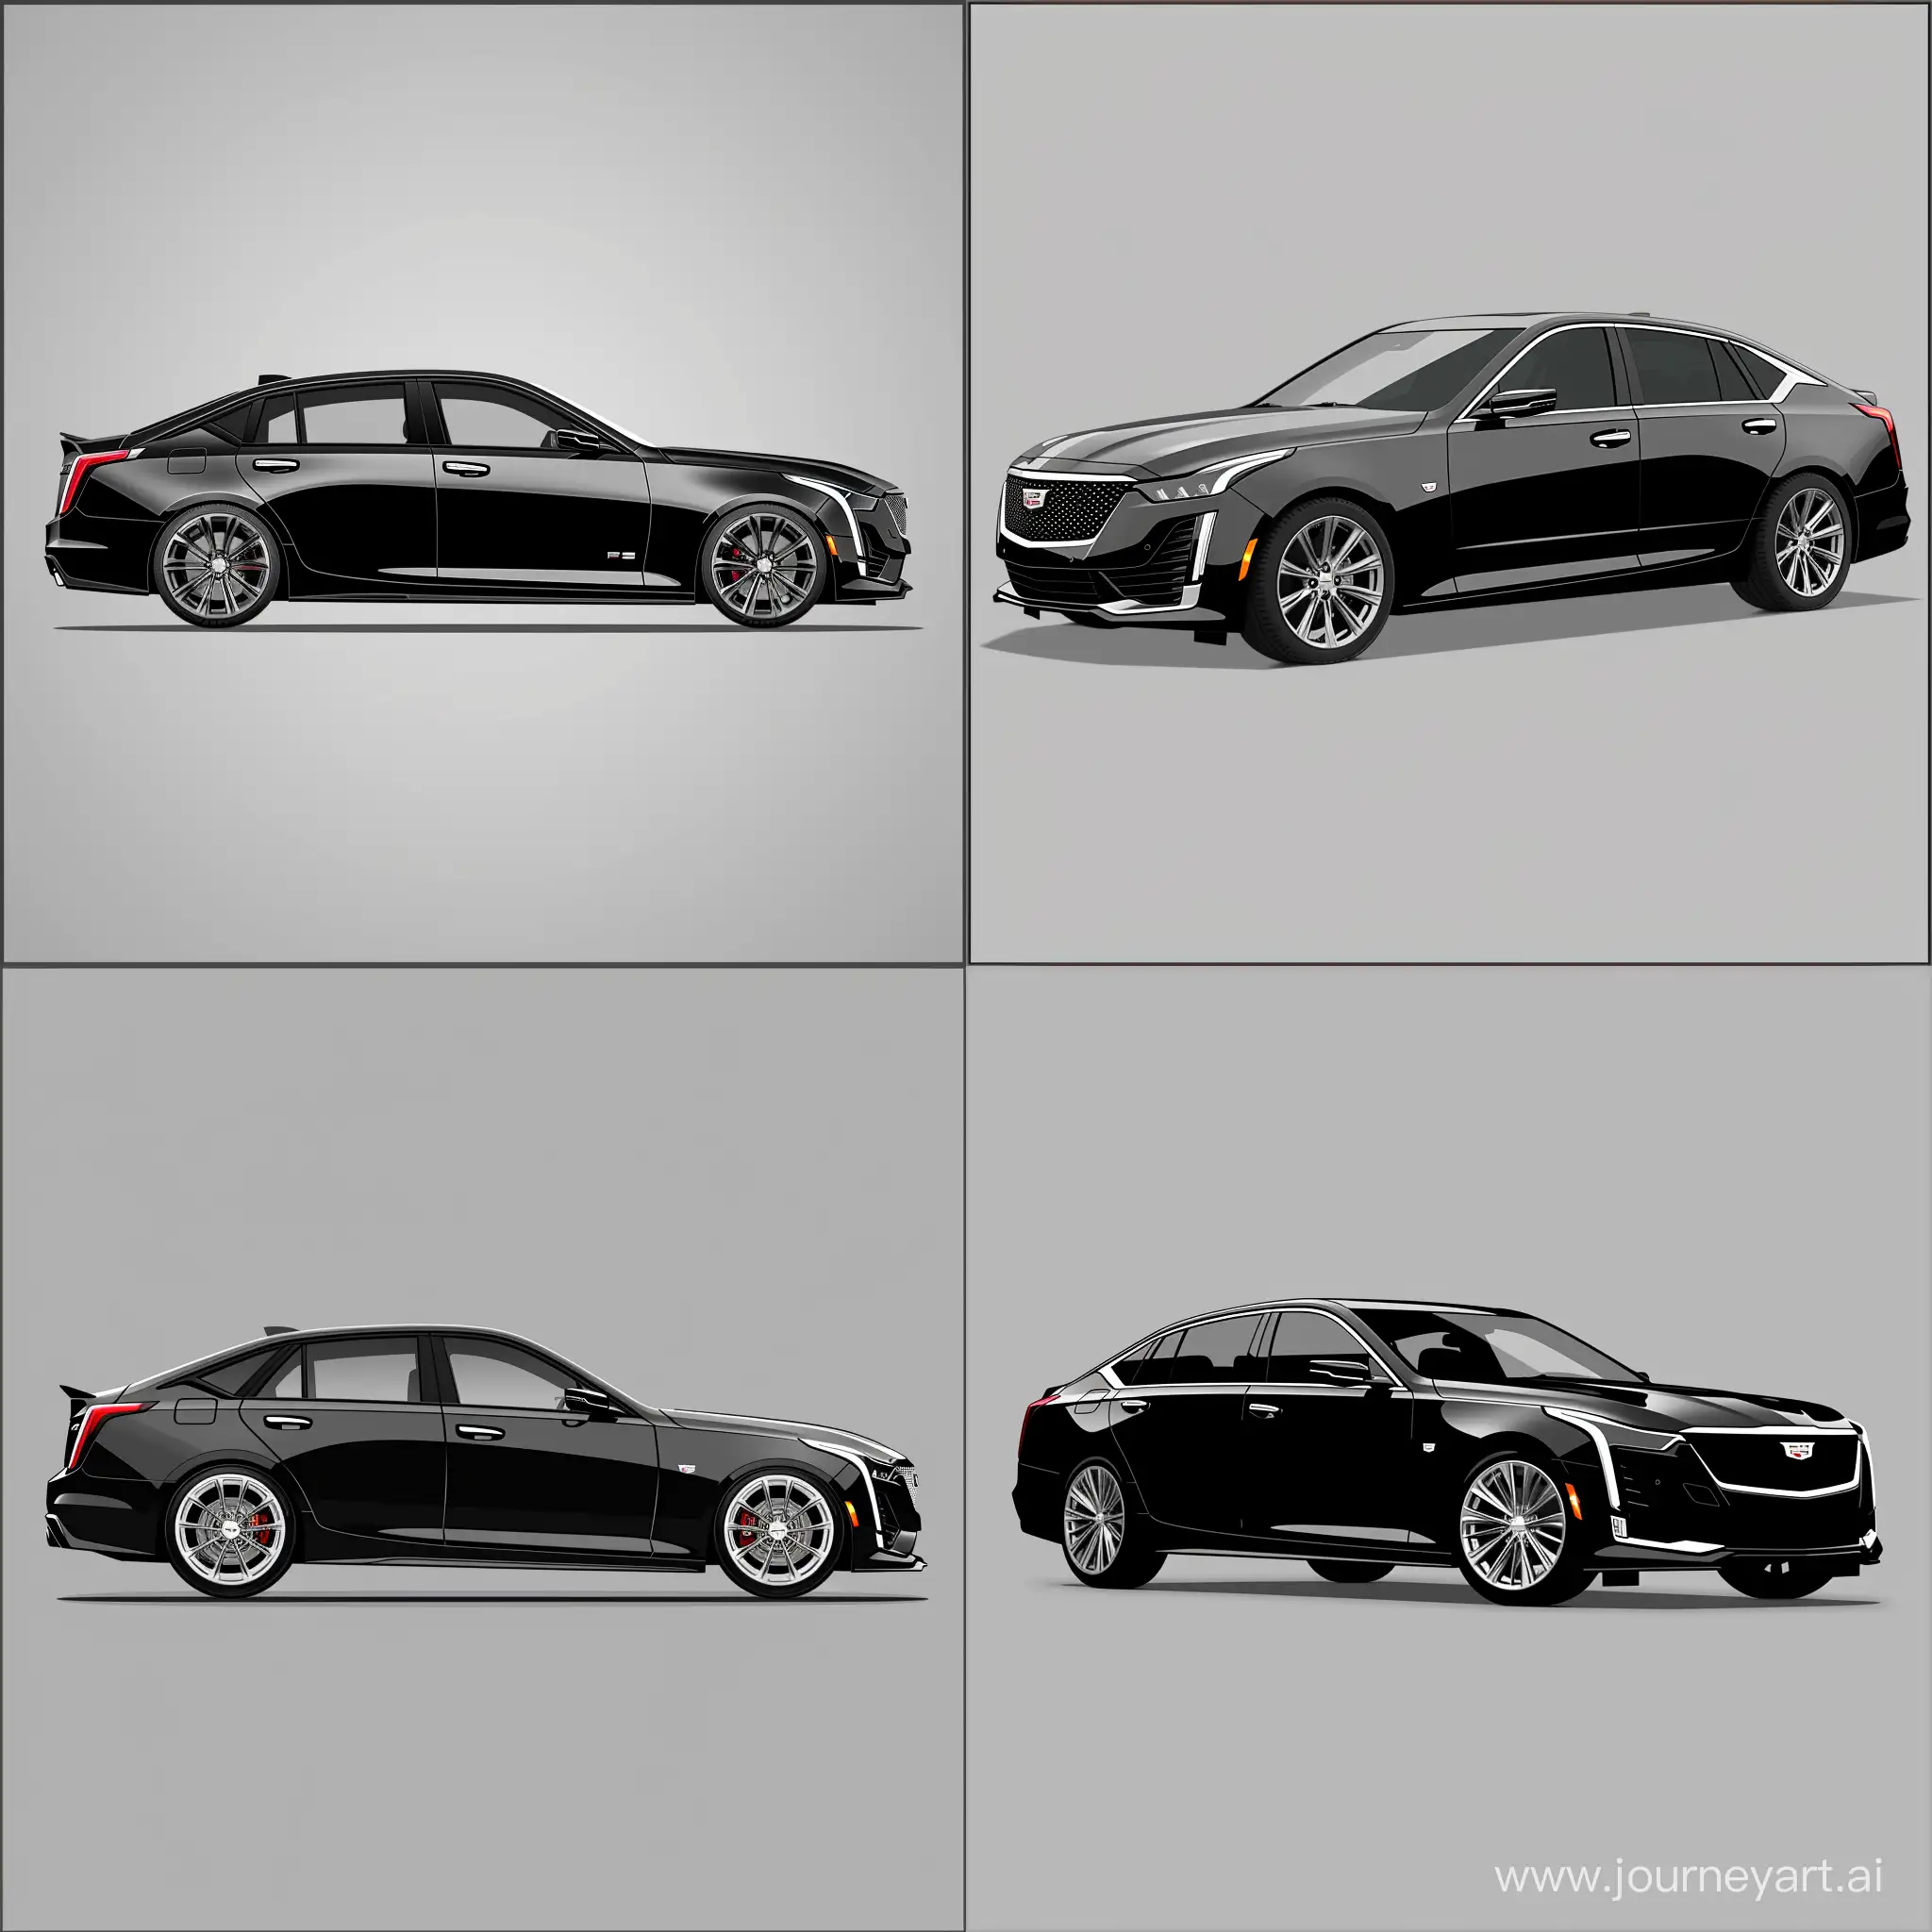 Cadillac-CT5-Minimalist-2D-Illustration-of-Black-Car-with-Silver-Rims-on-Gray-Background